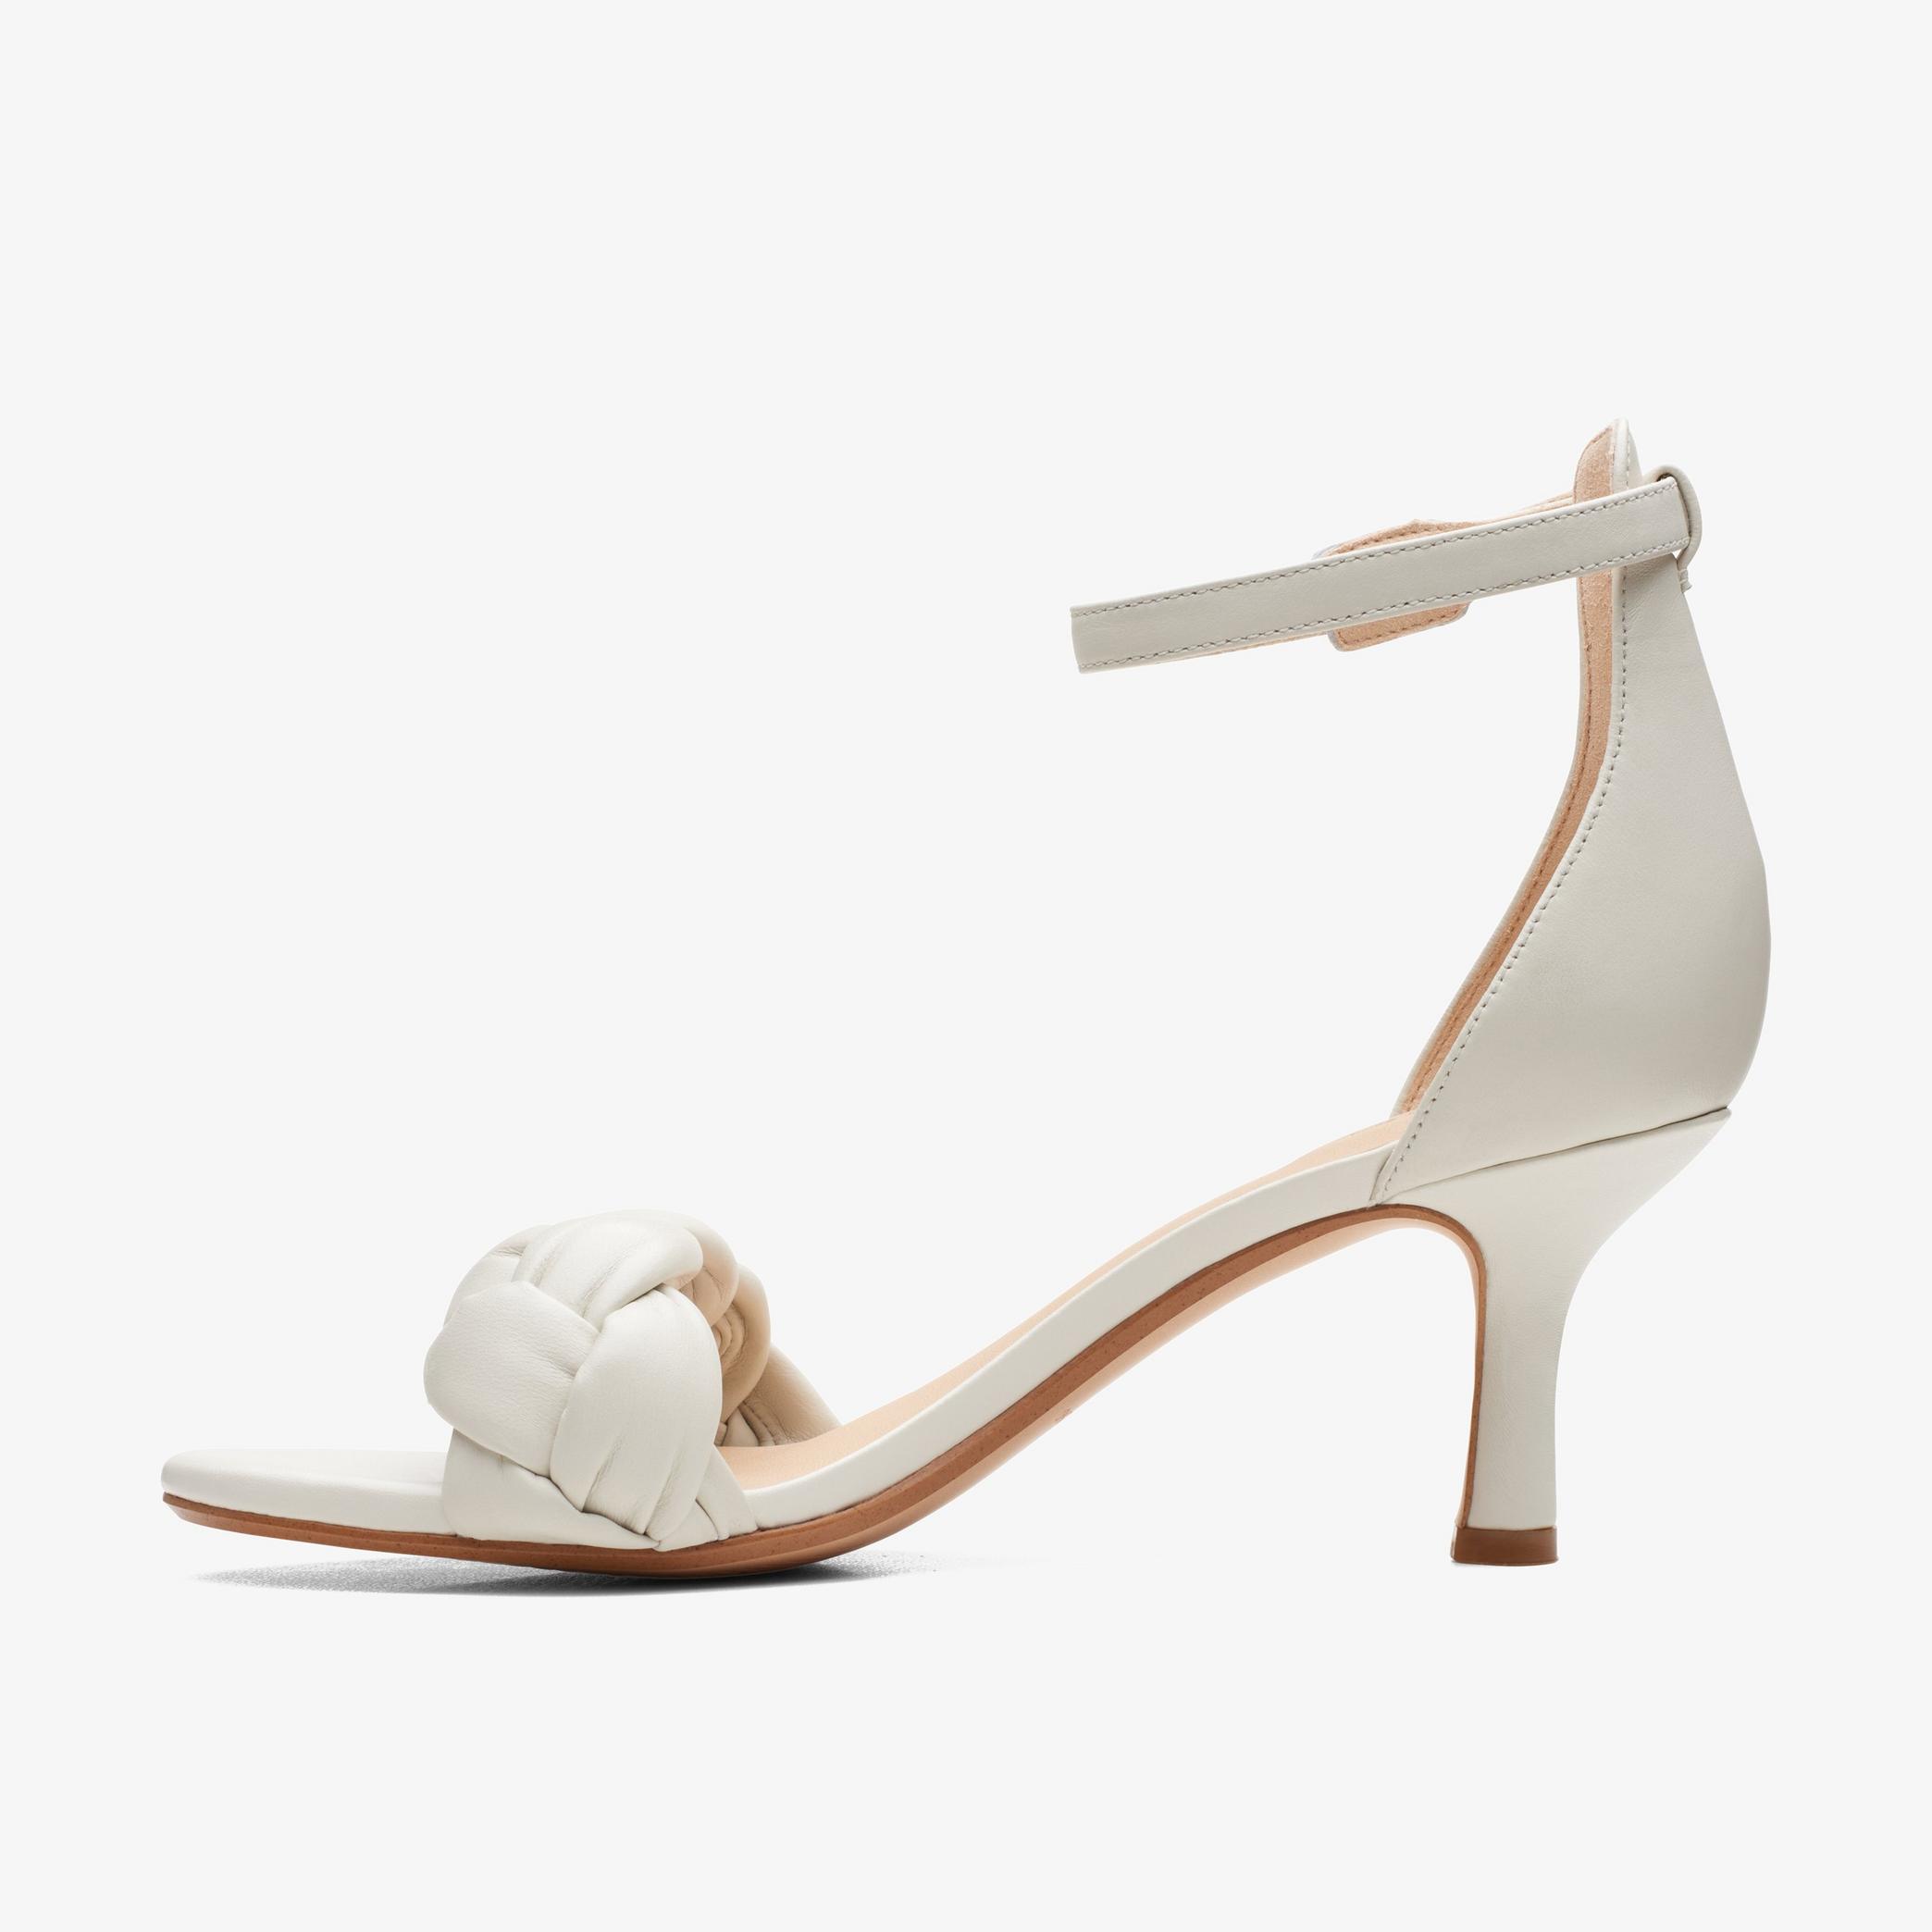 Amali Sandal White Leather Strappy Sandals, view 2 of 6